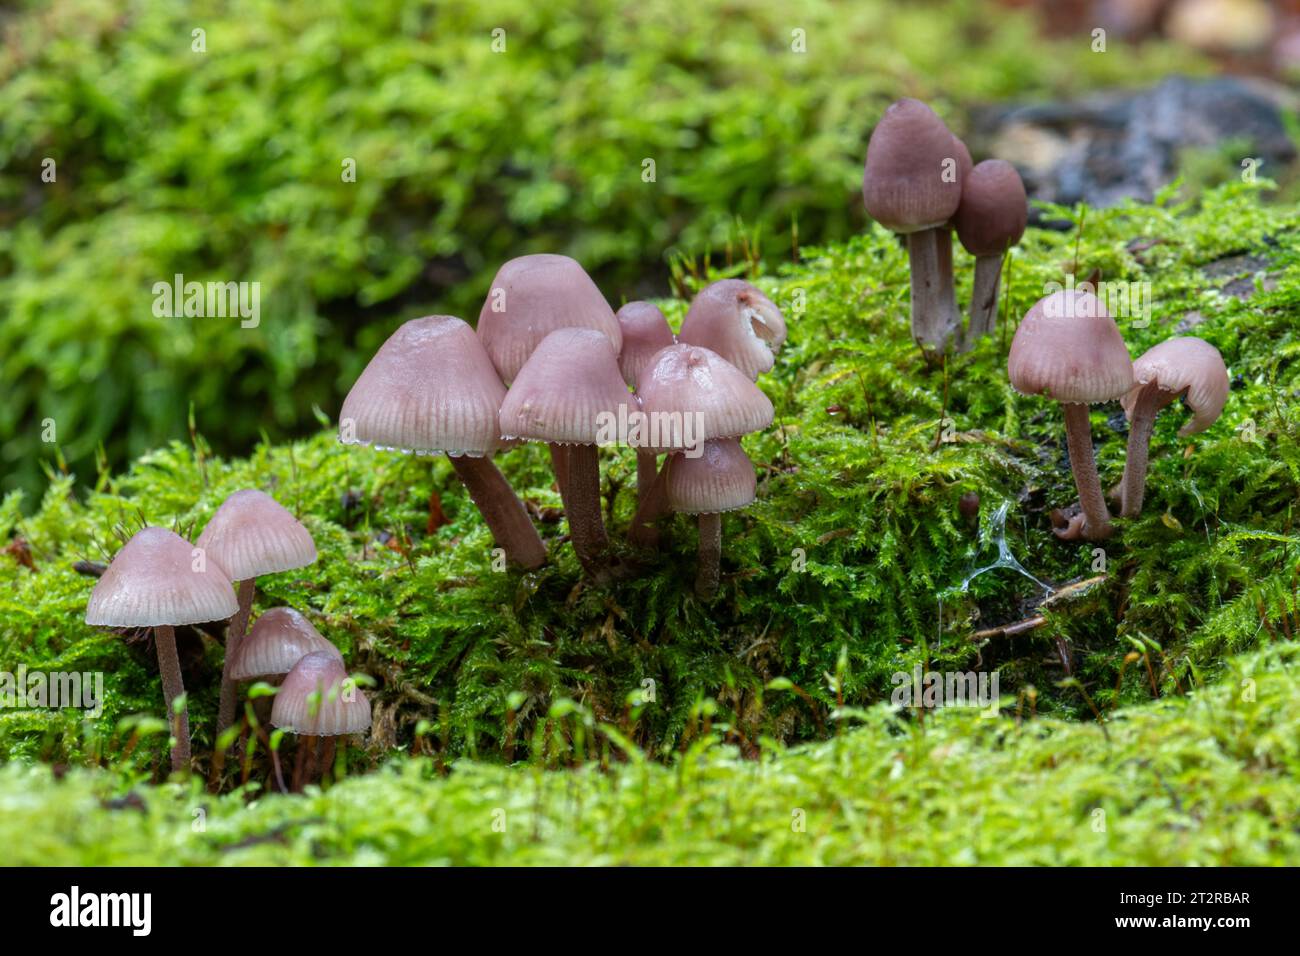 Mycena haematopus toadstools, commonly known as the burgundydrop bonnet, fungi growing on dead tree trunk during autumn or October, UK Stock Photo